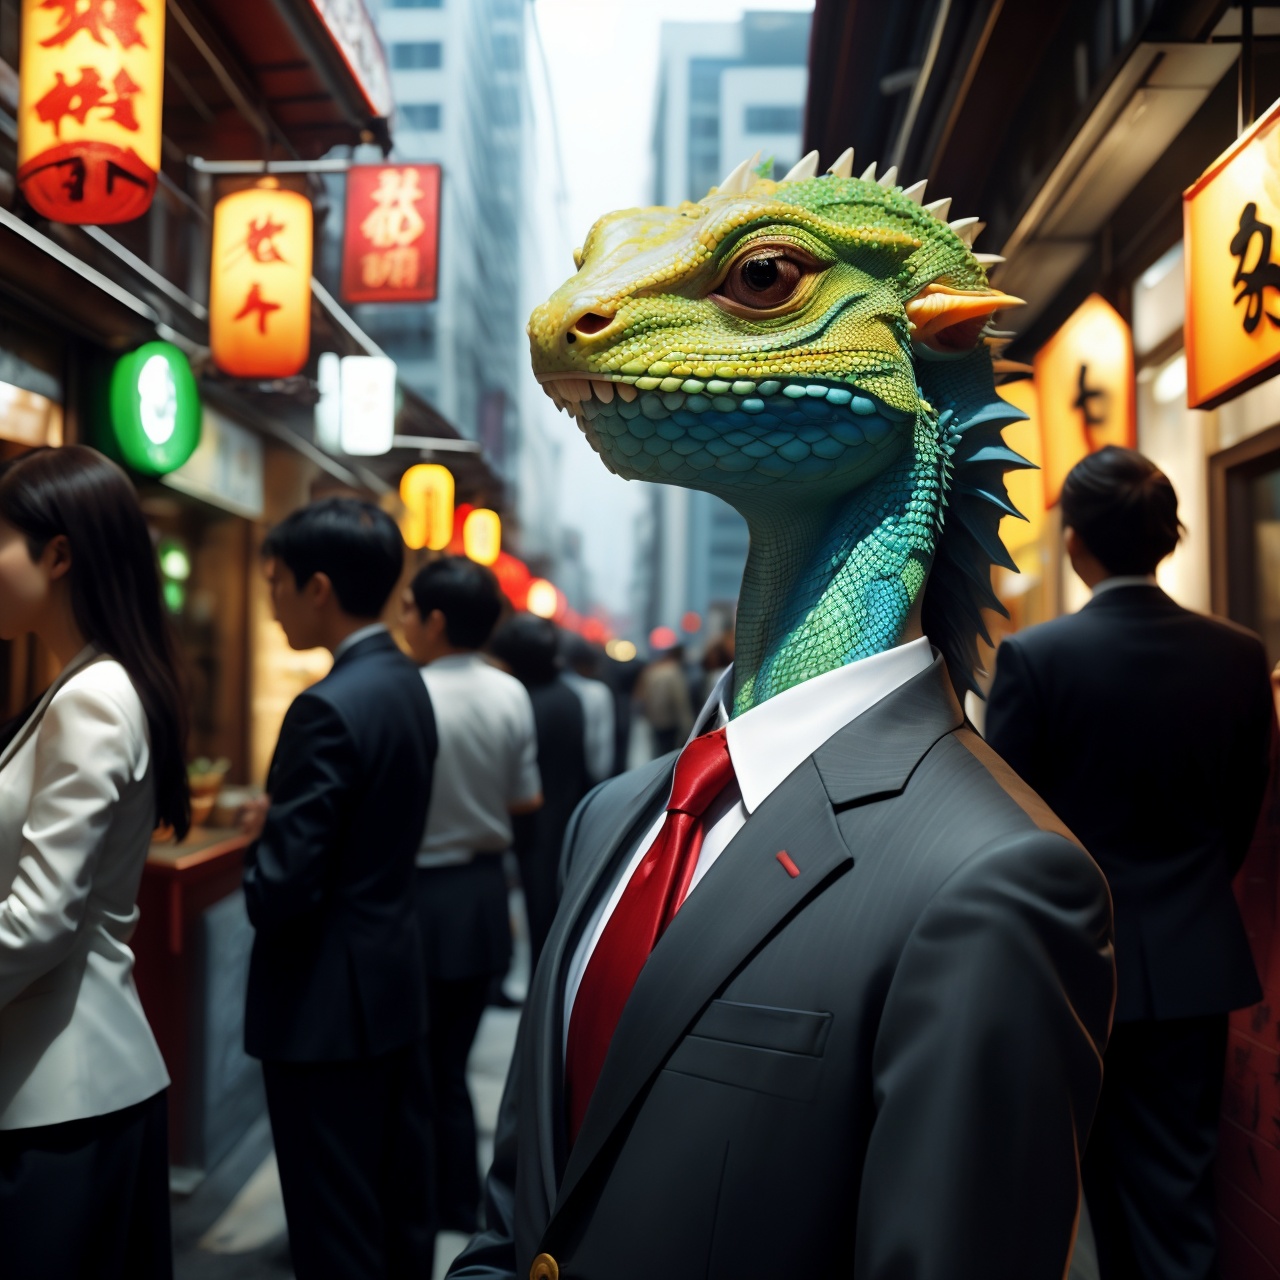 a lizard like lawyer in a business suit waiting in line outside a popular noodle restaurant,scales,casual,crowded,realistic,intricate,highly detailed,